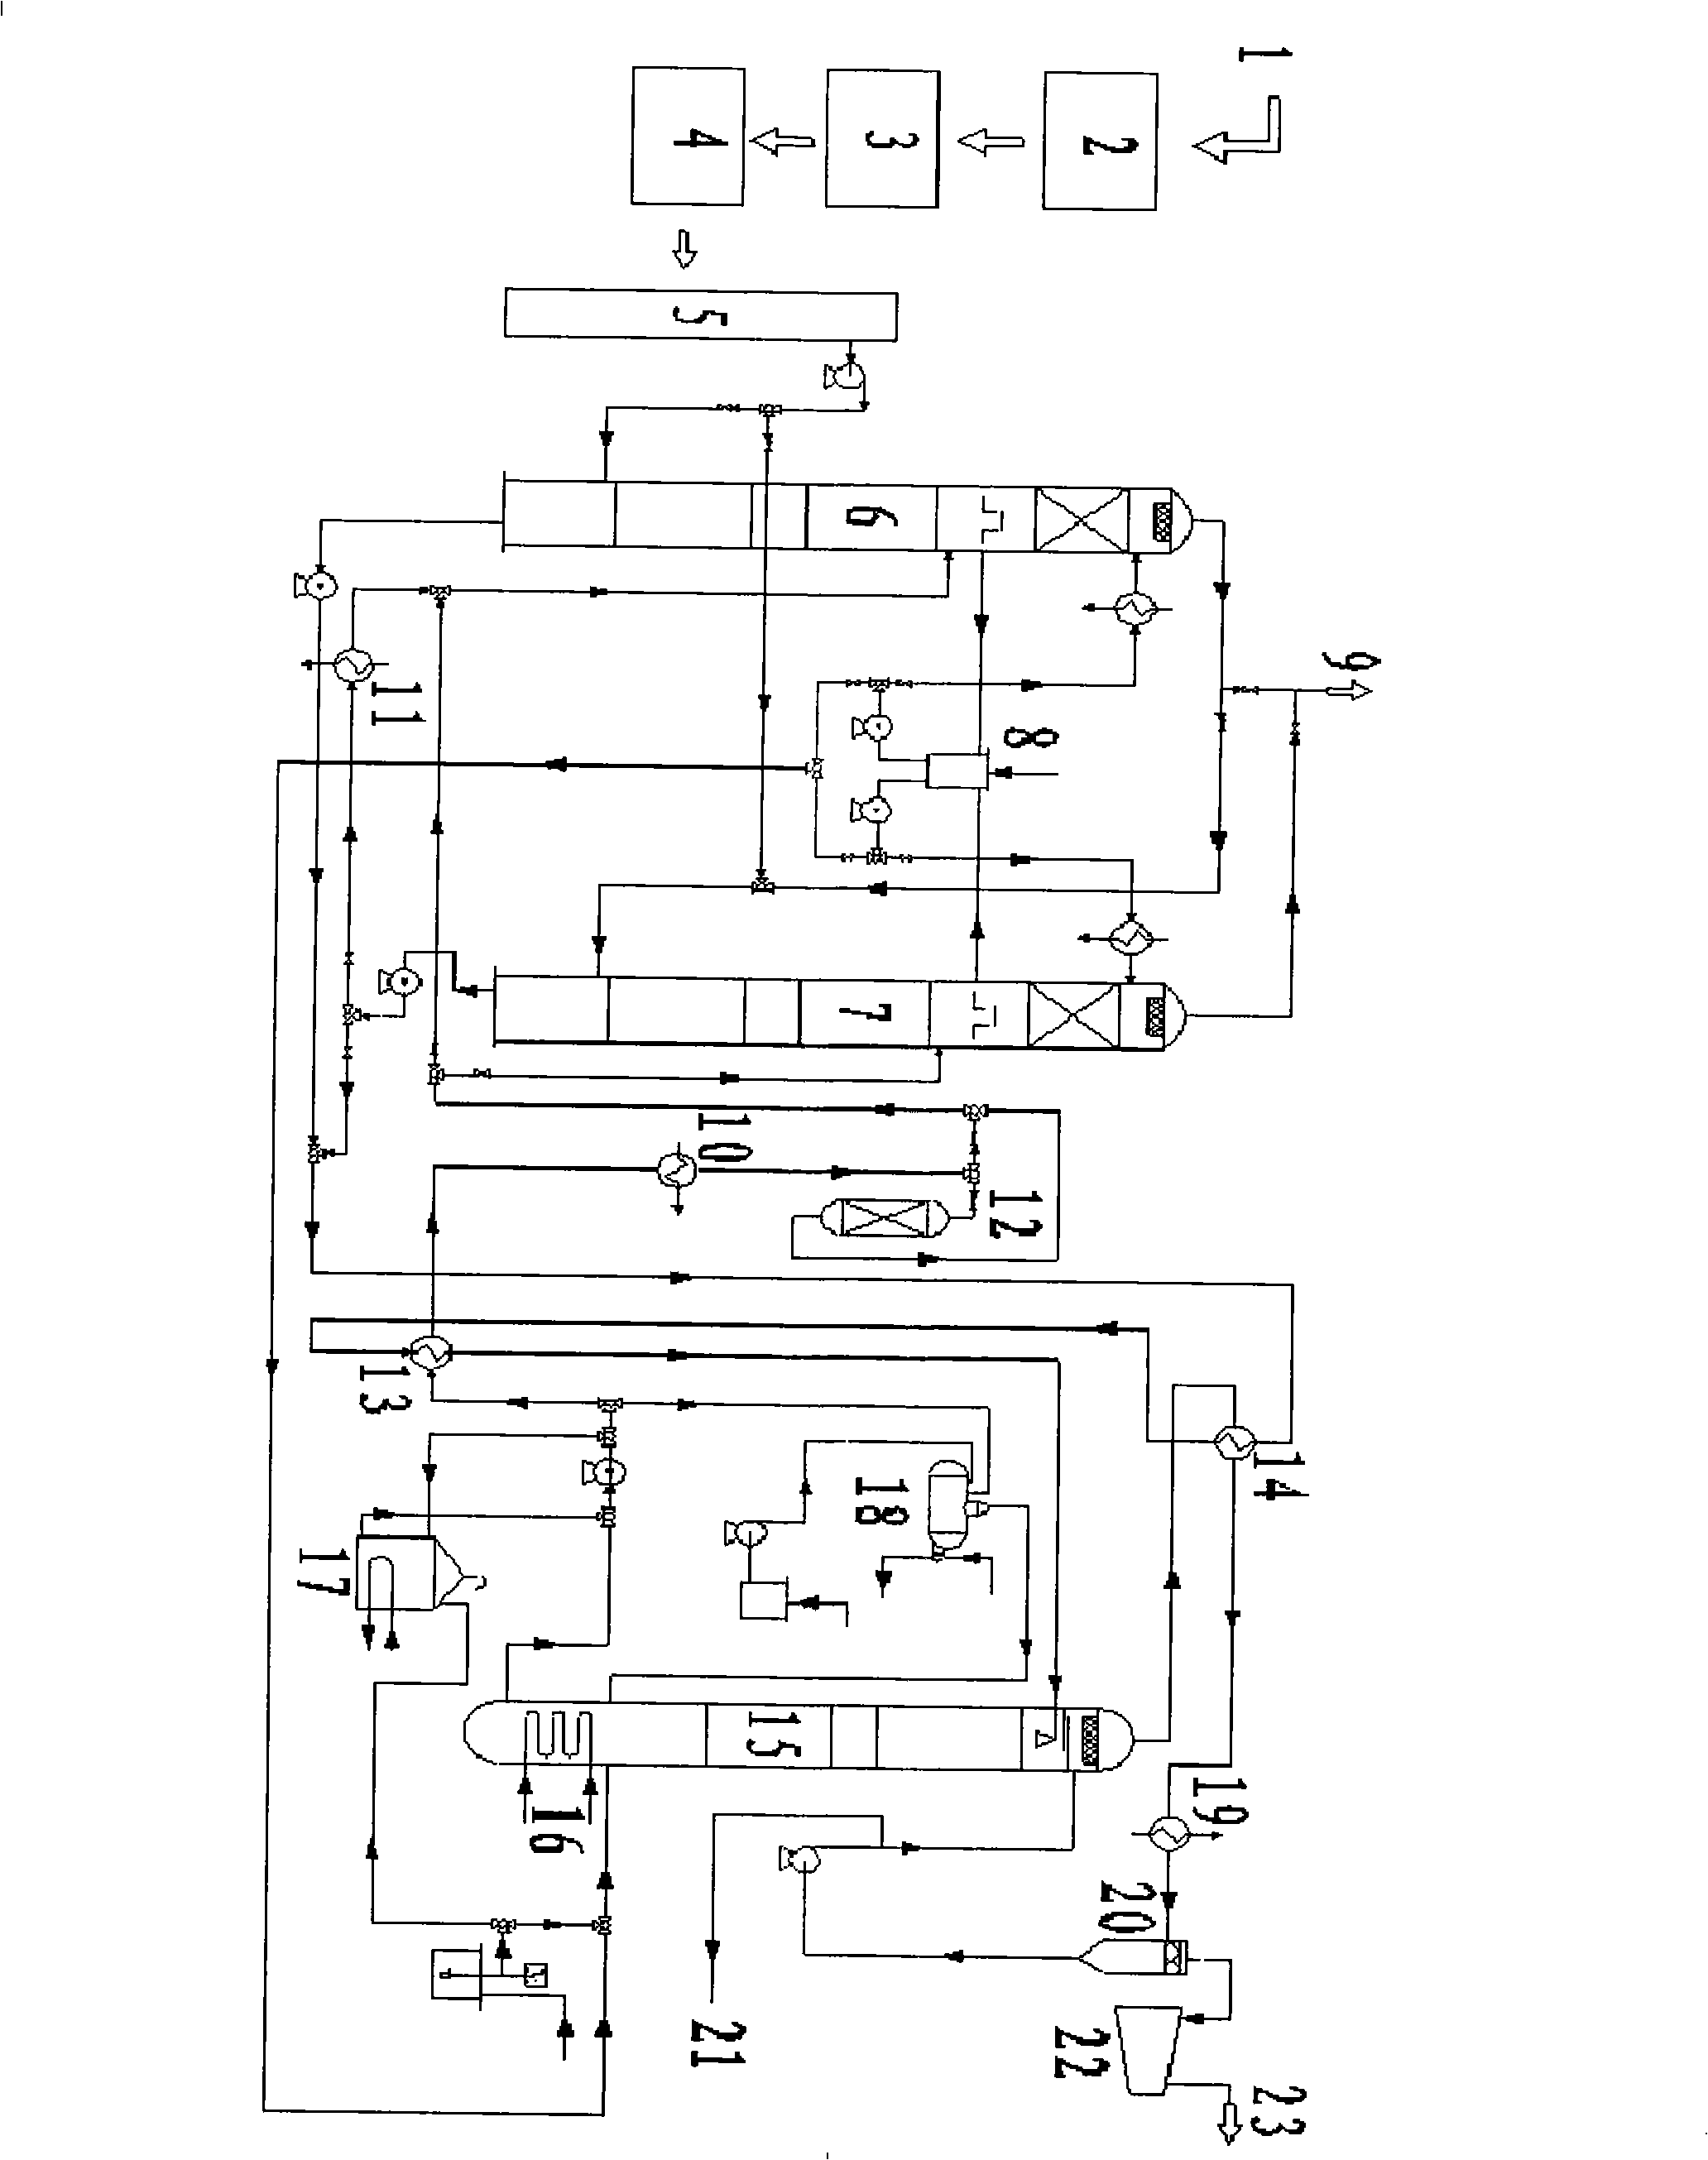 Method and apparatus for collecting carbonic anhydride in coal-fired plant flue gas